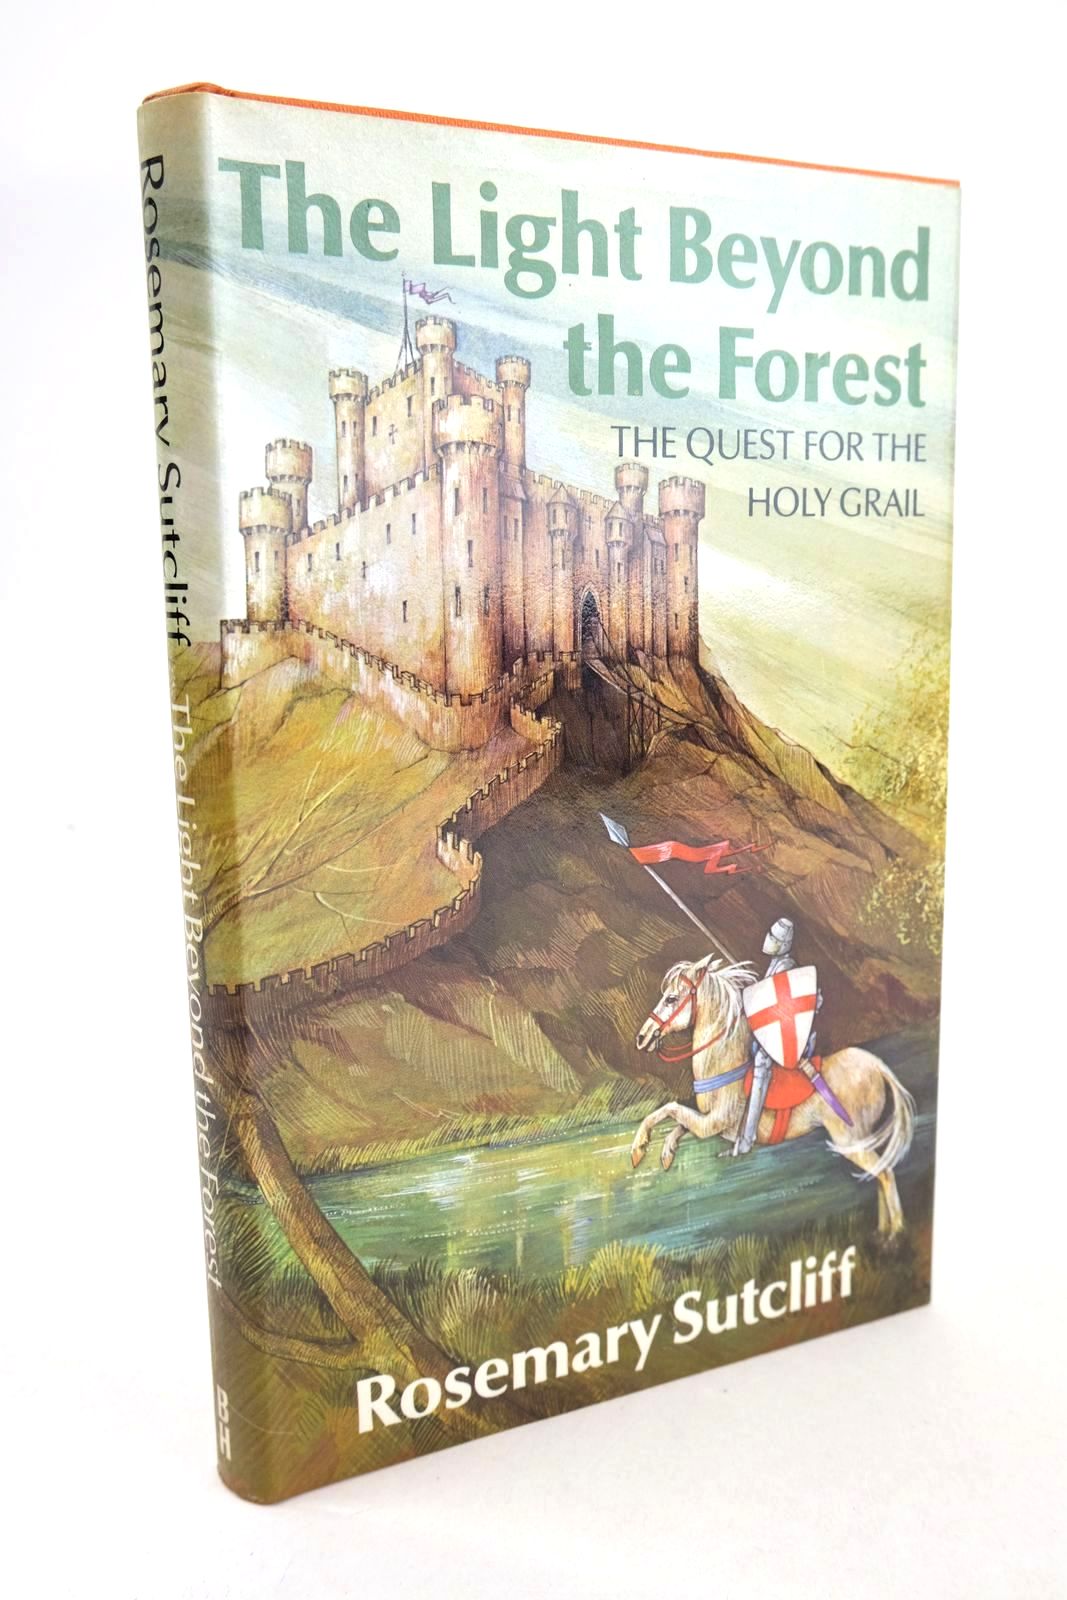 Photo of THE LIGHT BEYOND THE FOREST written by Sutcliff, Rosemary illustrated by Felts, Shirley published by The Bodley Head (STOCK CODE: 1326276)  for sale by Stella & Rose's Books